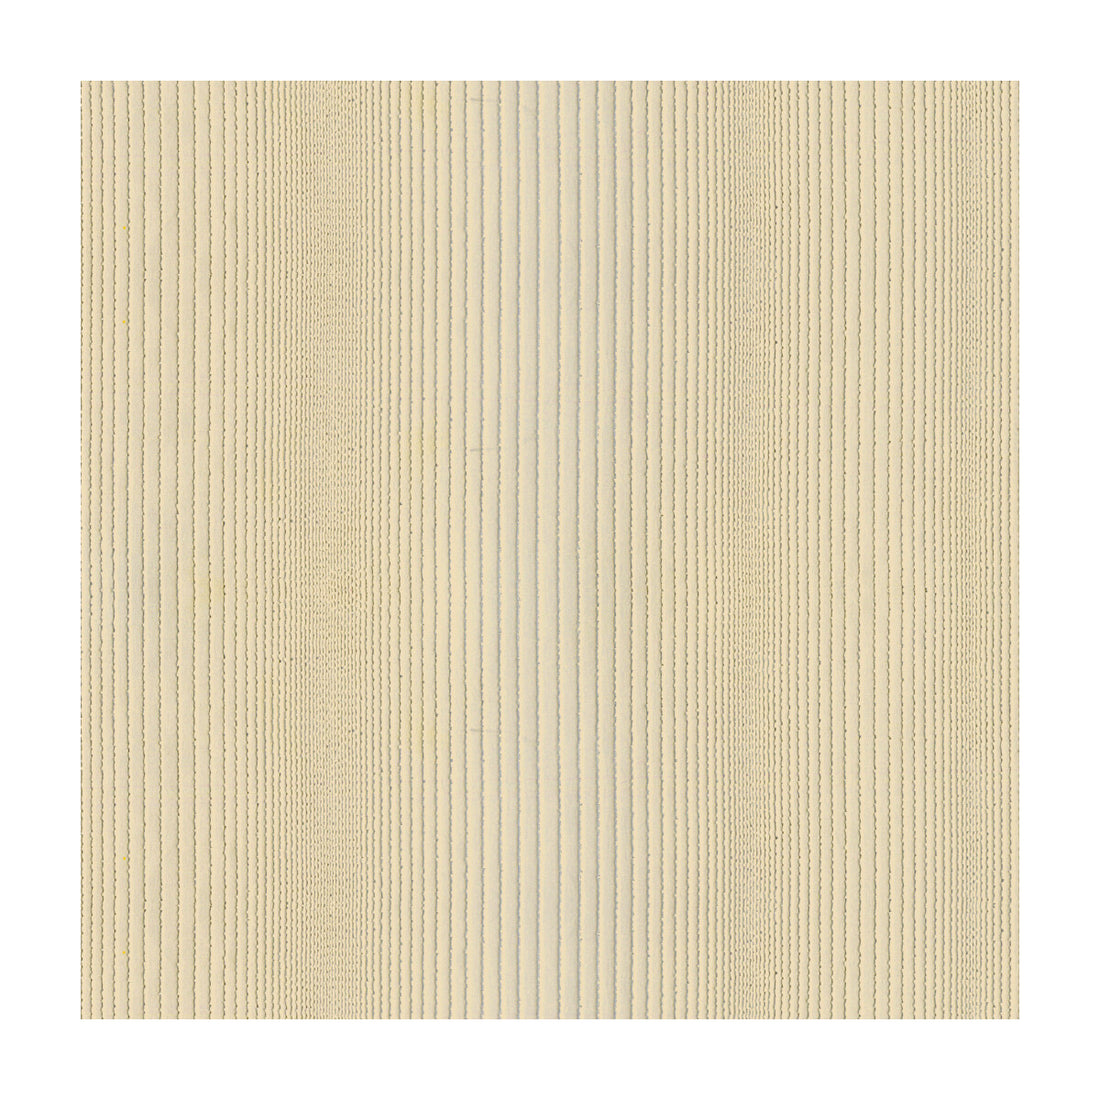 Kravet Contract fabric in 4168-16 color - pattern 4168.16.0 - by Kravet Contract